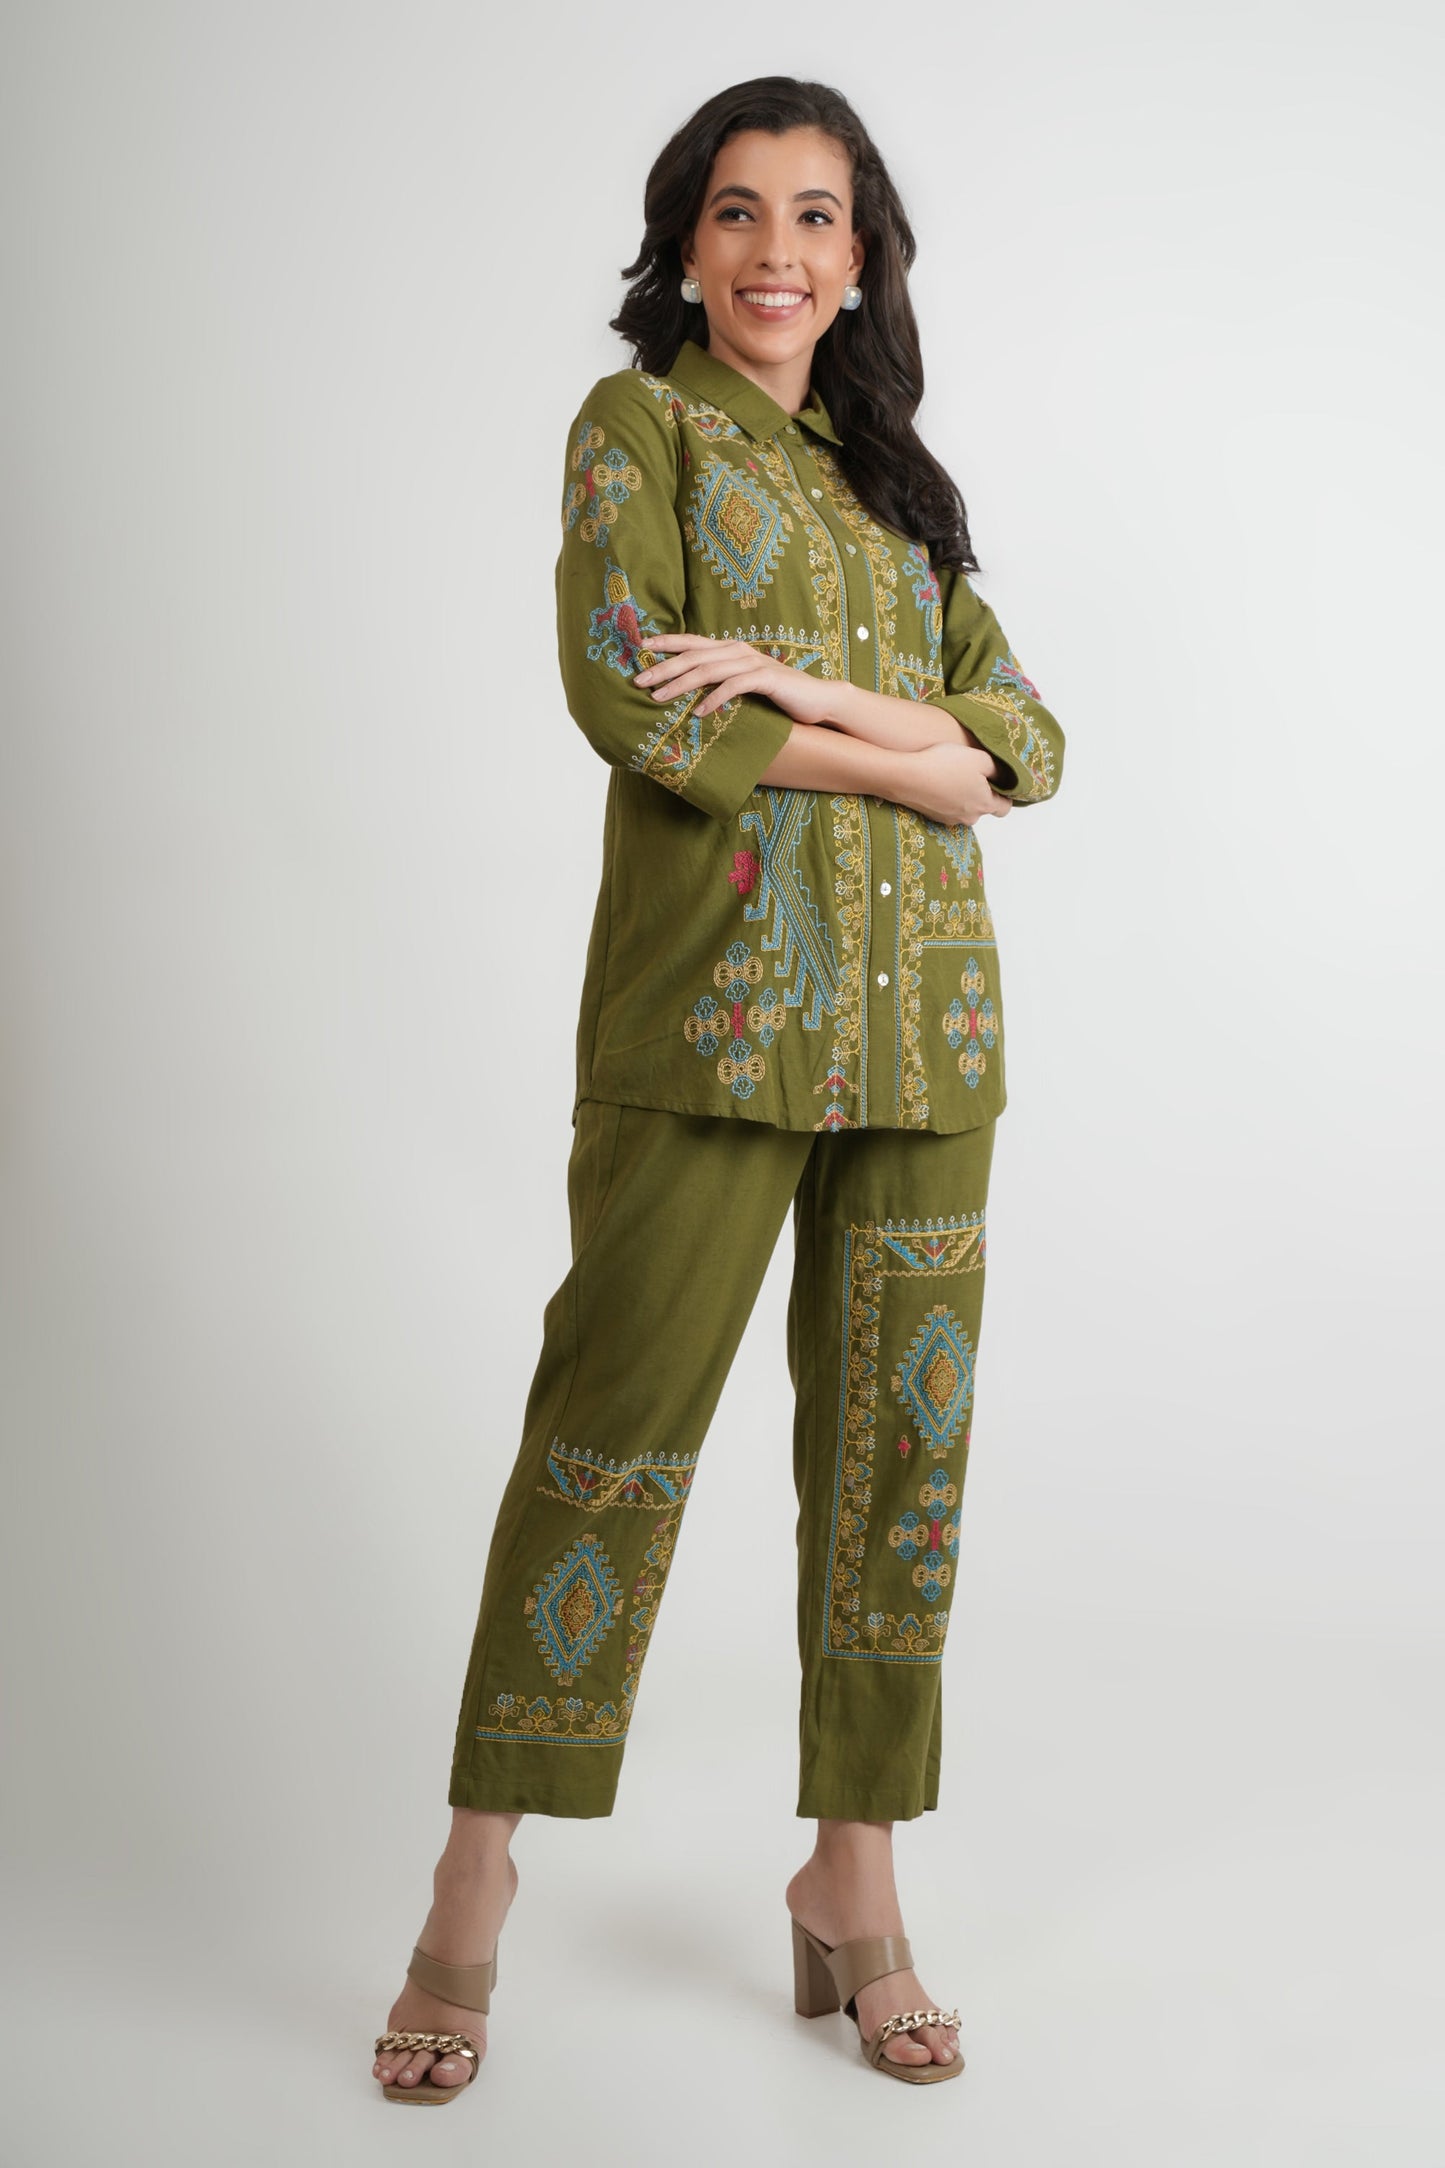 Green Embroidered Shirt and Pants - Co-ord Set - Dresses - APANAKAH